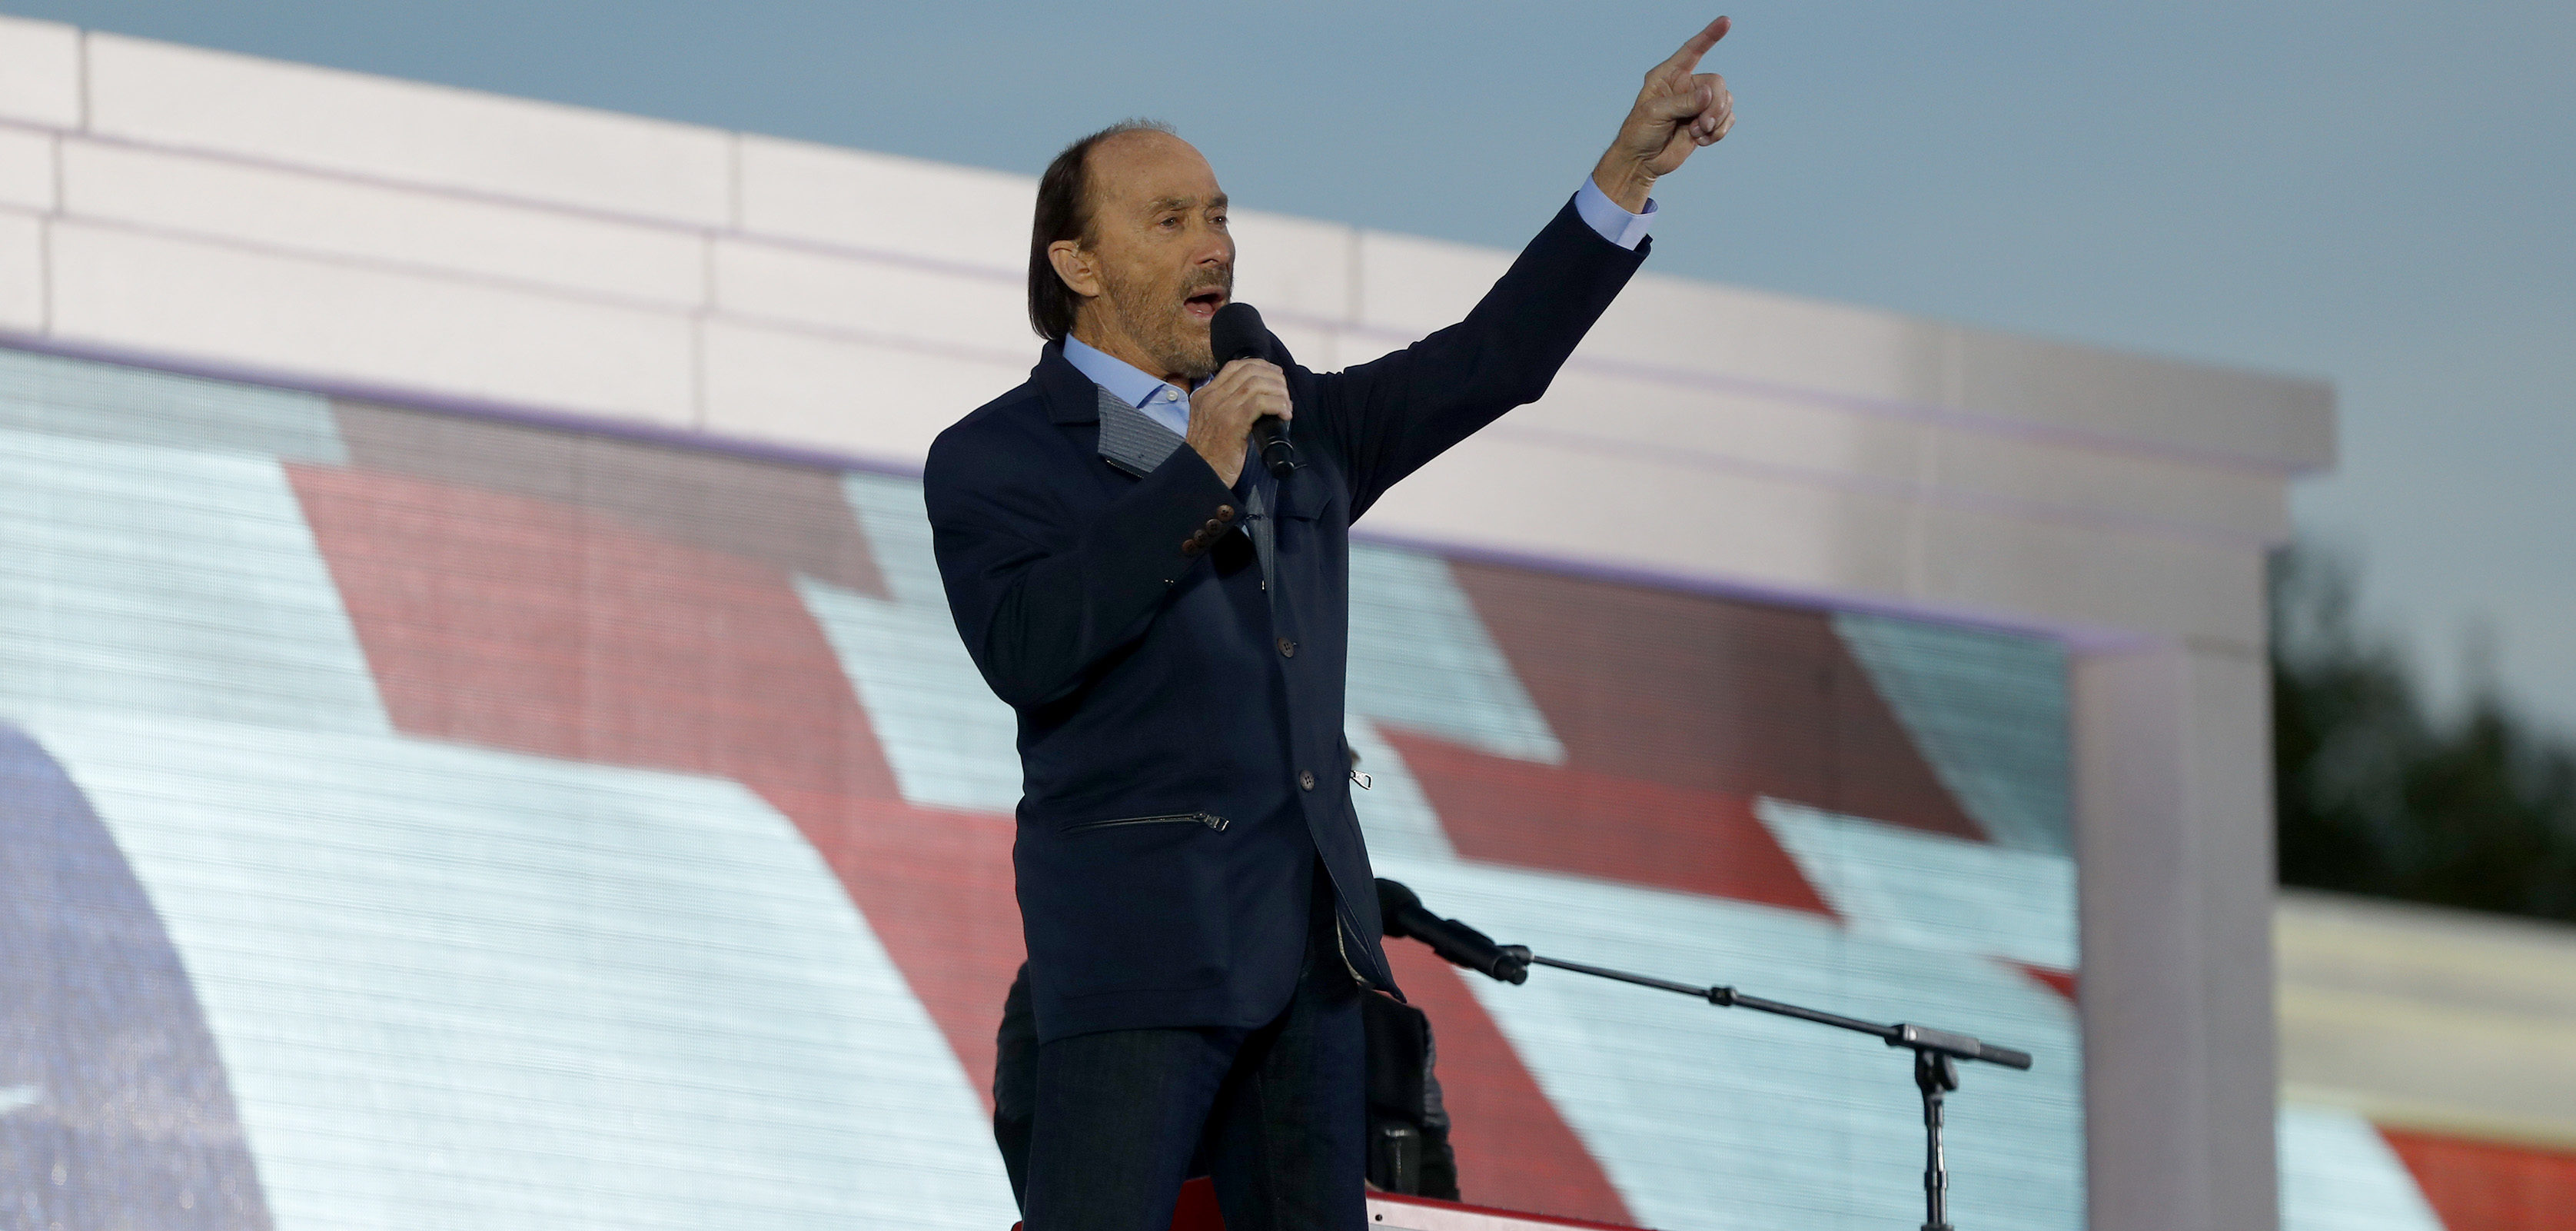 WASHINGTON, DC - JANUARY 19: Singer Lee Greenwood performs during the inauguration concert at the Lincoln Memorial January 19, 2017 in Washington, DC. Hundreds of thousands of people are expected tomorrow for Trump's inauguration as the 45th president of the United States. (Photo by Aaron P. Bernstein/Getty Images)